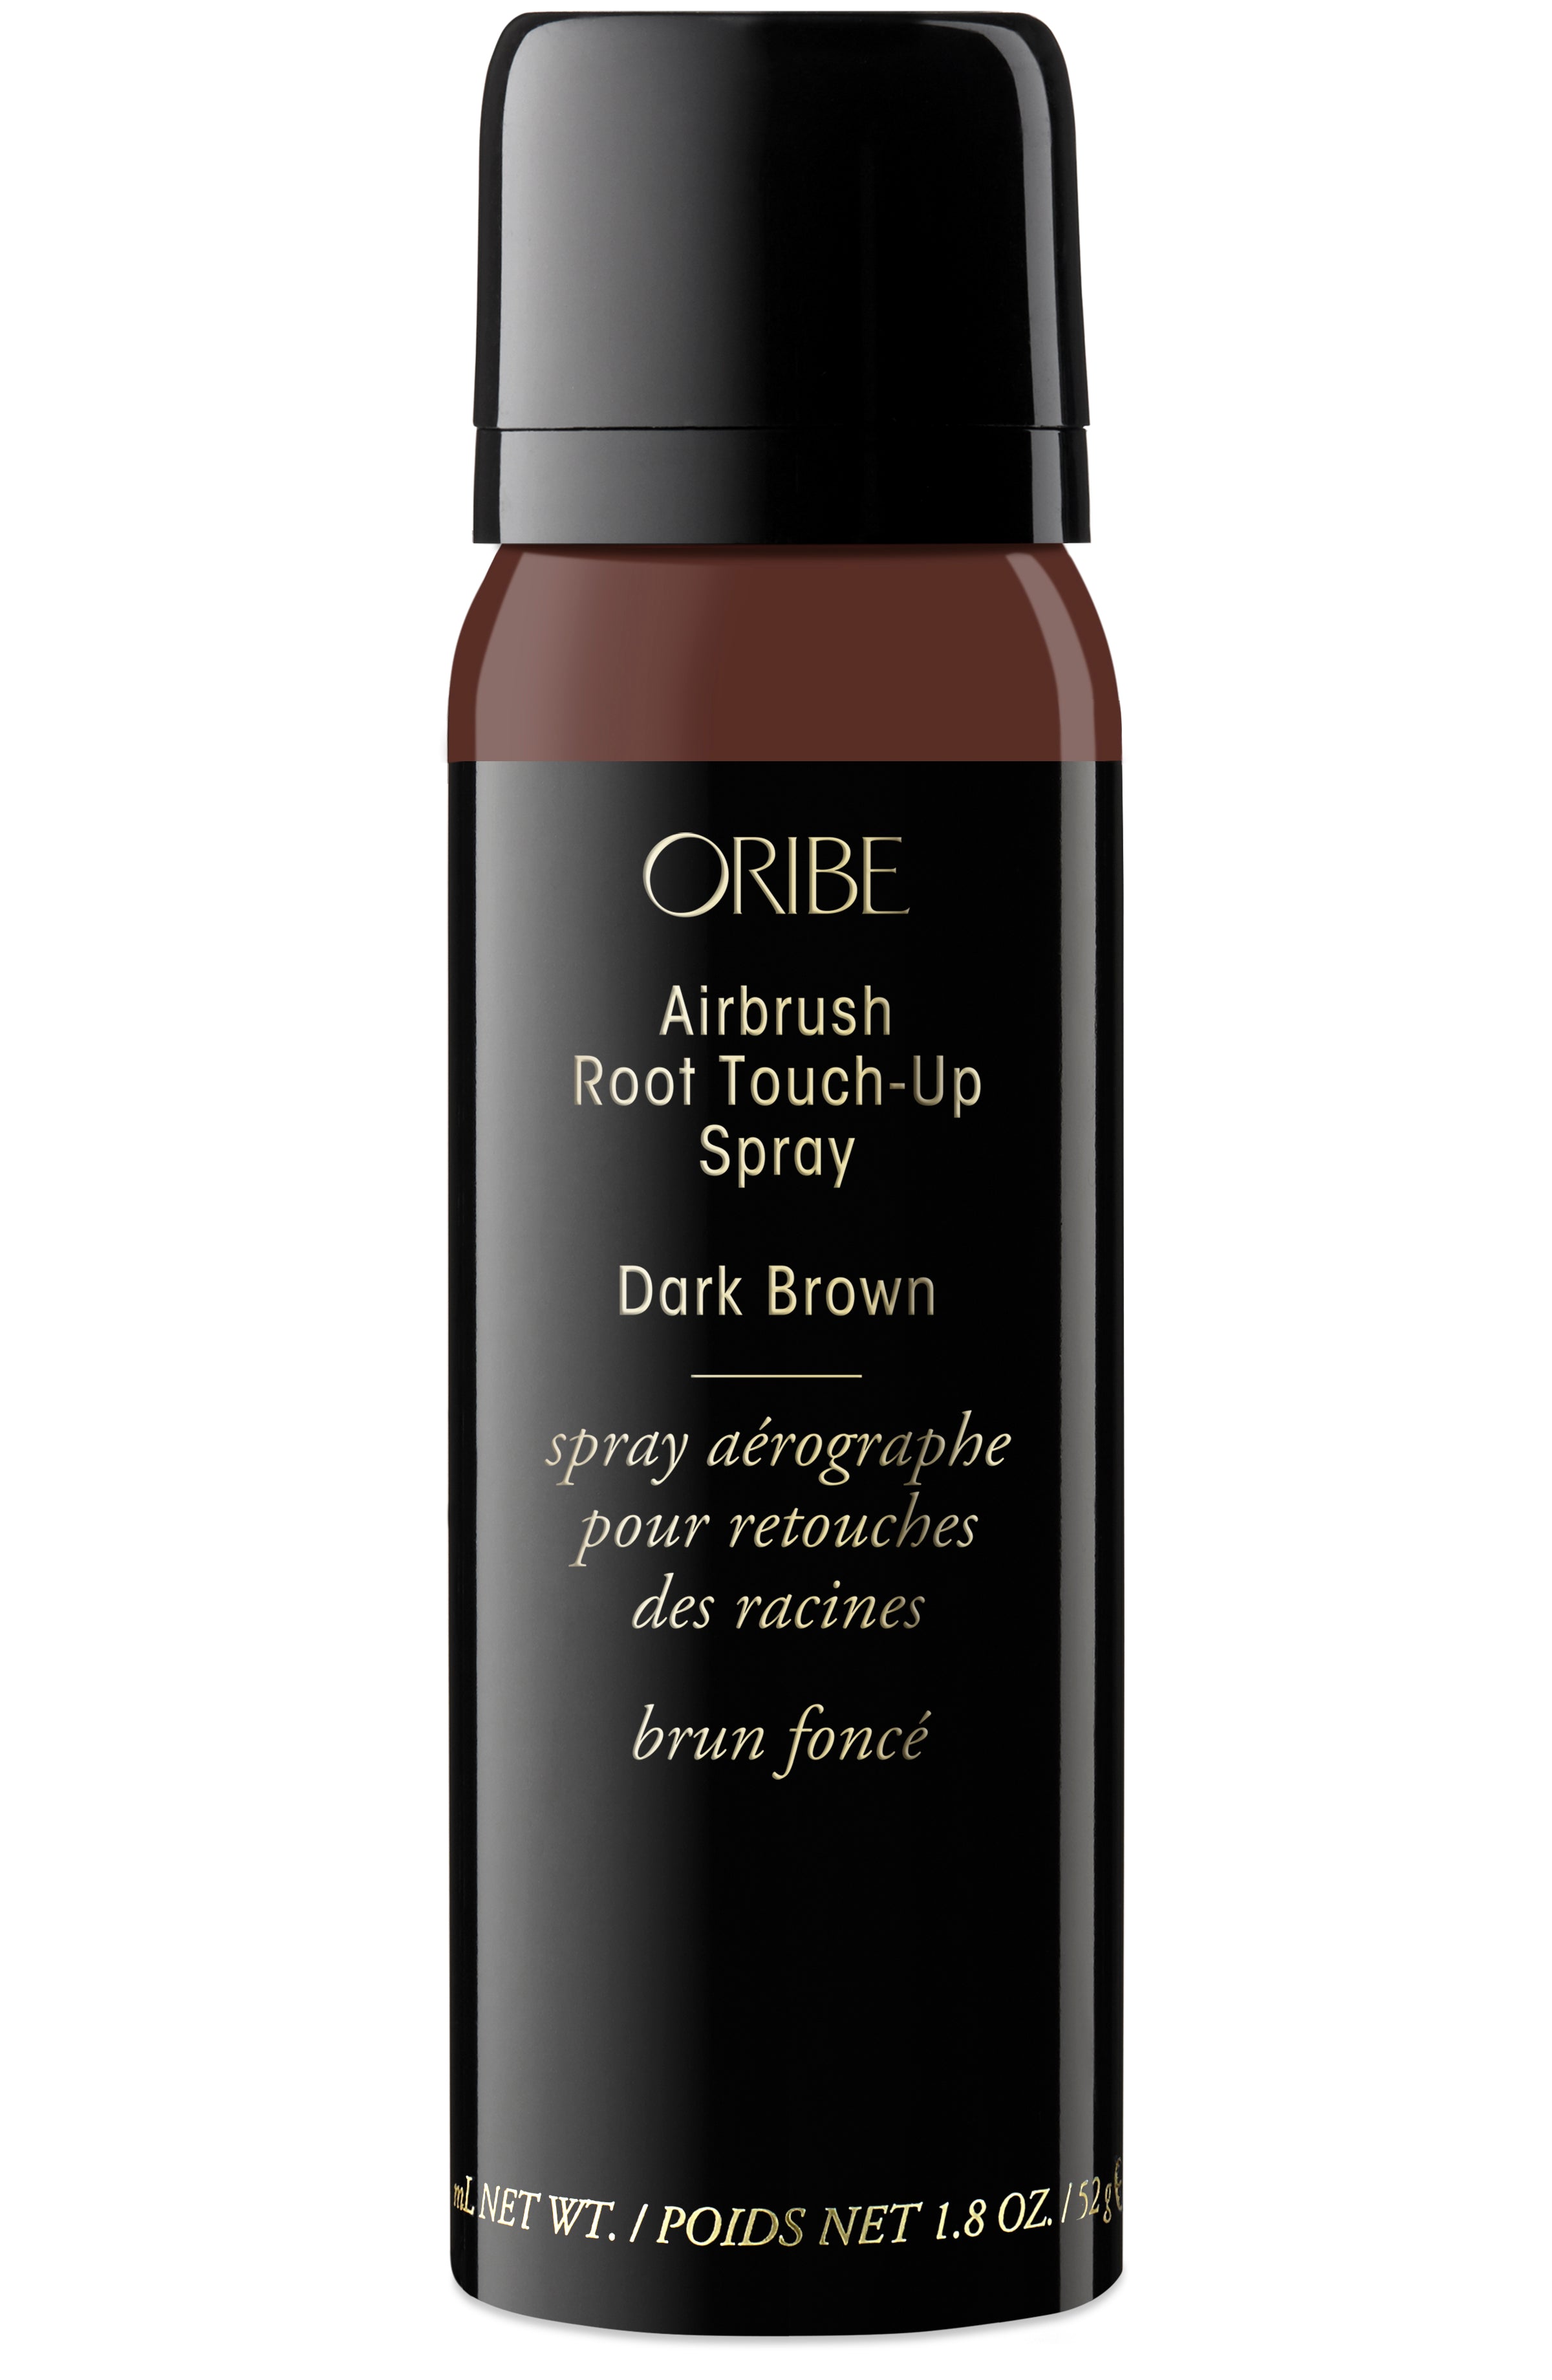 Airbrush Root Touch-Up Spray - 75mL